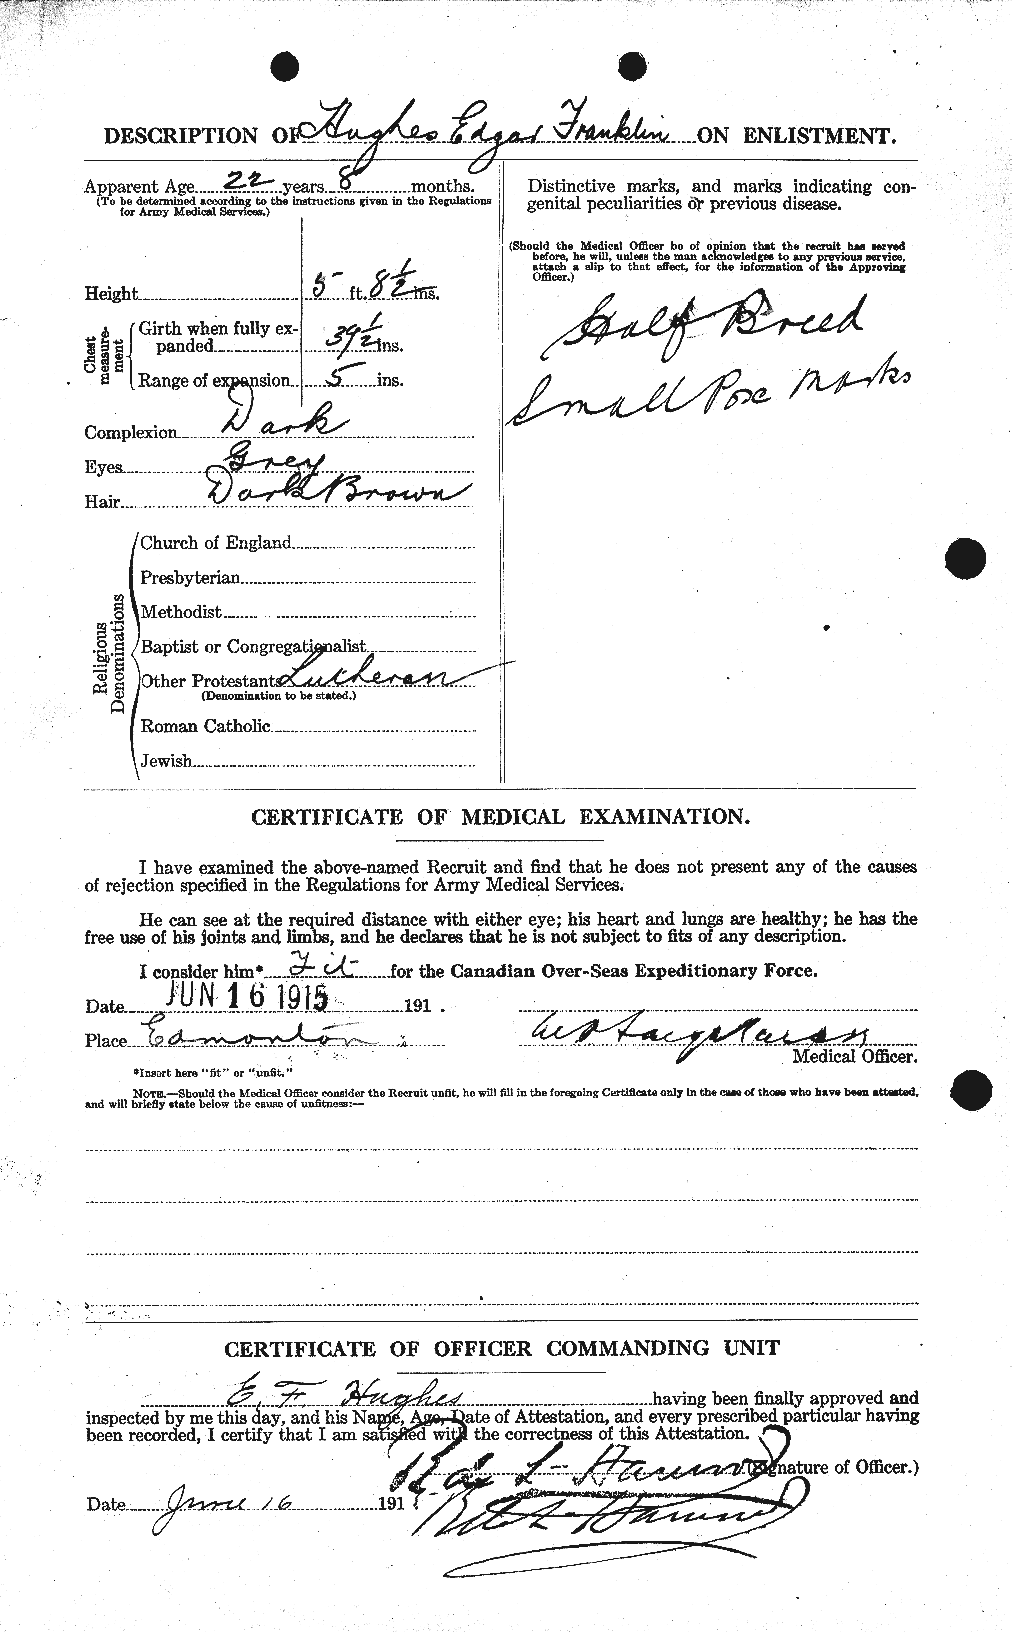 Personnel Records of the First World War - CEF 402659b